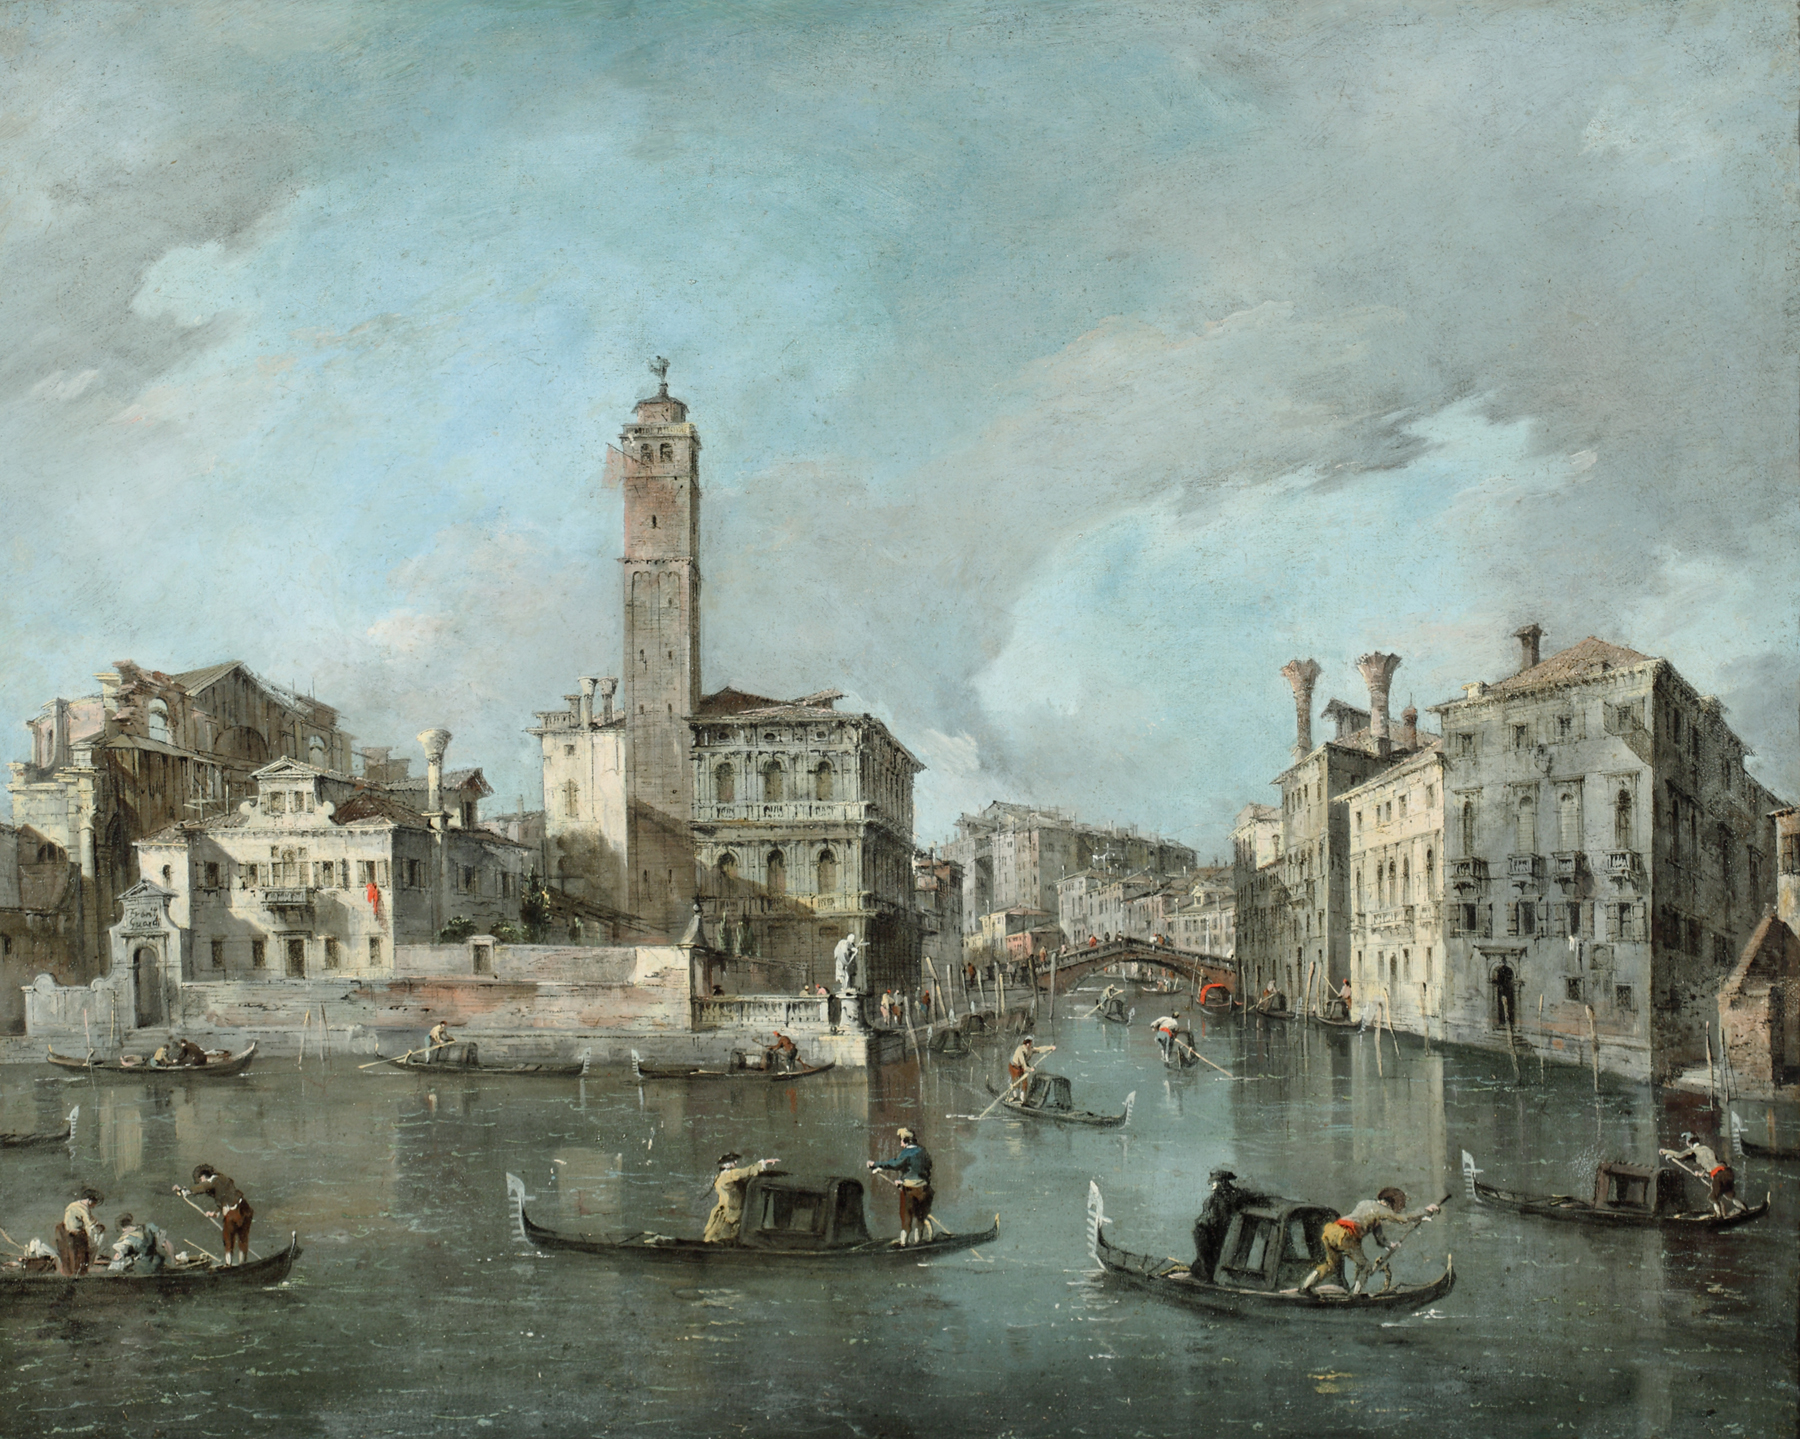 In the 1700s, before picture postcards, wealthy travelers bought paintings as mementos. Francesco Guardi's "View on the Grand Canal at San Geremia, Venice" (1760-65) wound up many years later in the collection of Henry Clay Frick.